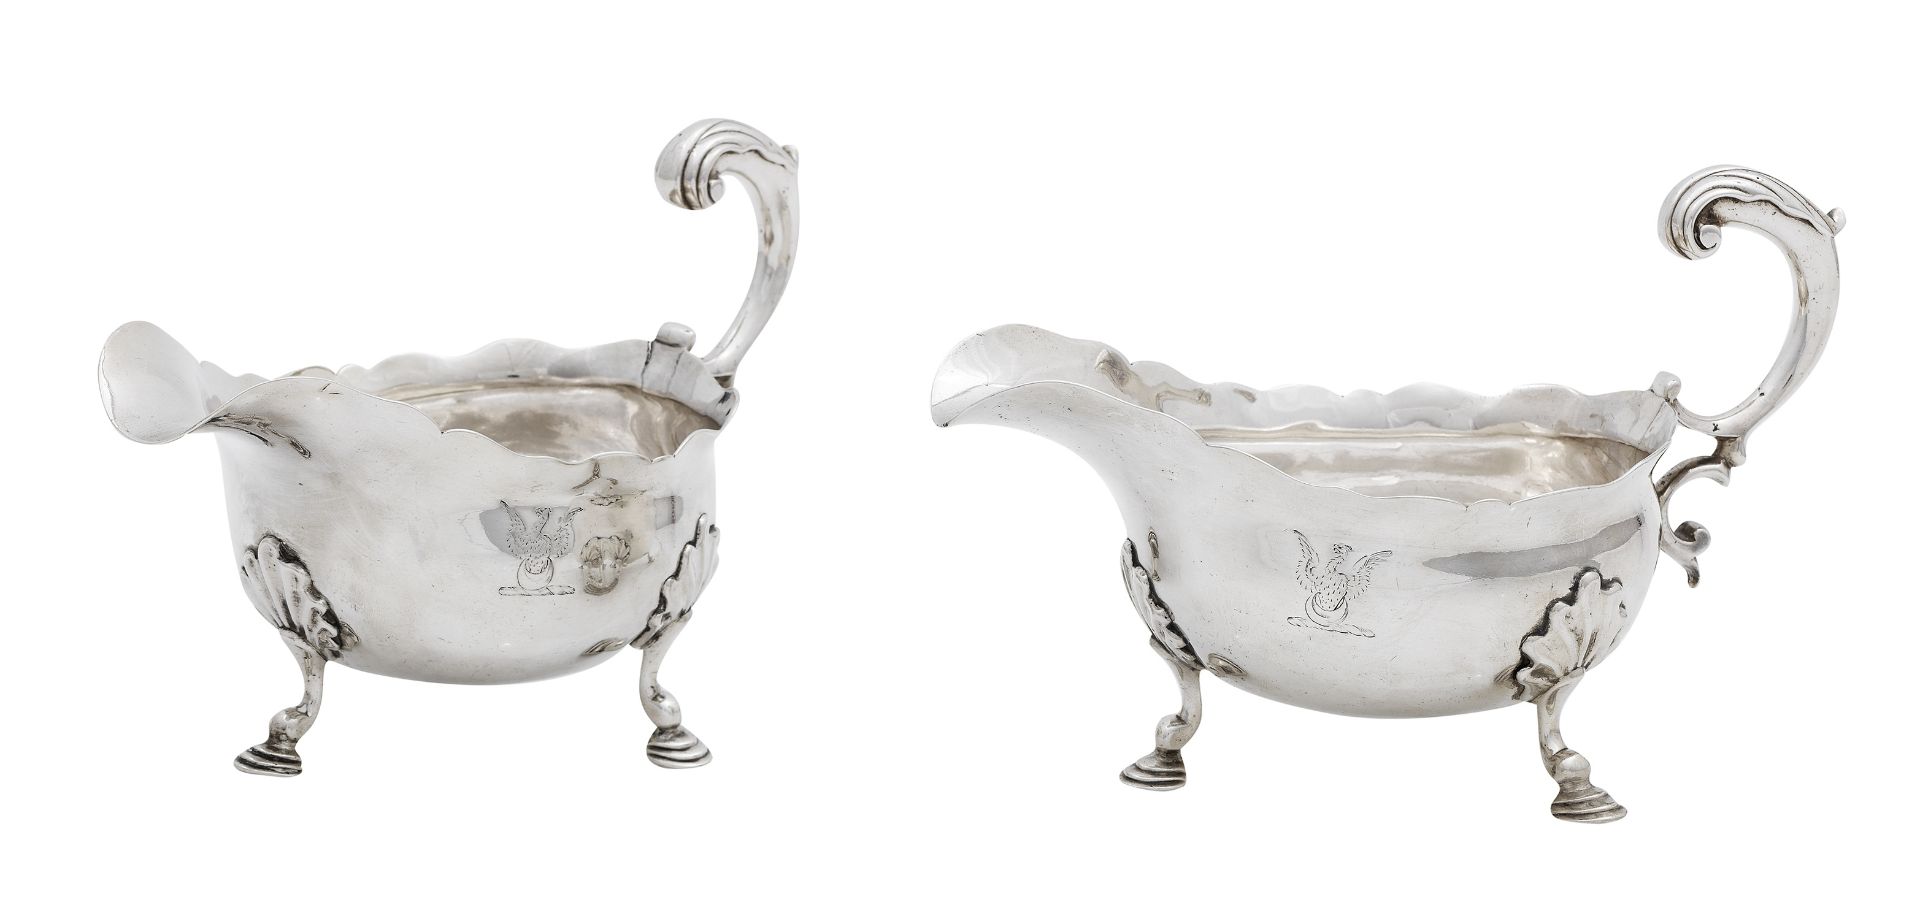 A pair of George III silver sauce boats maker's mark W.B, London, 1756